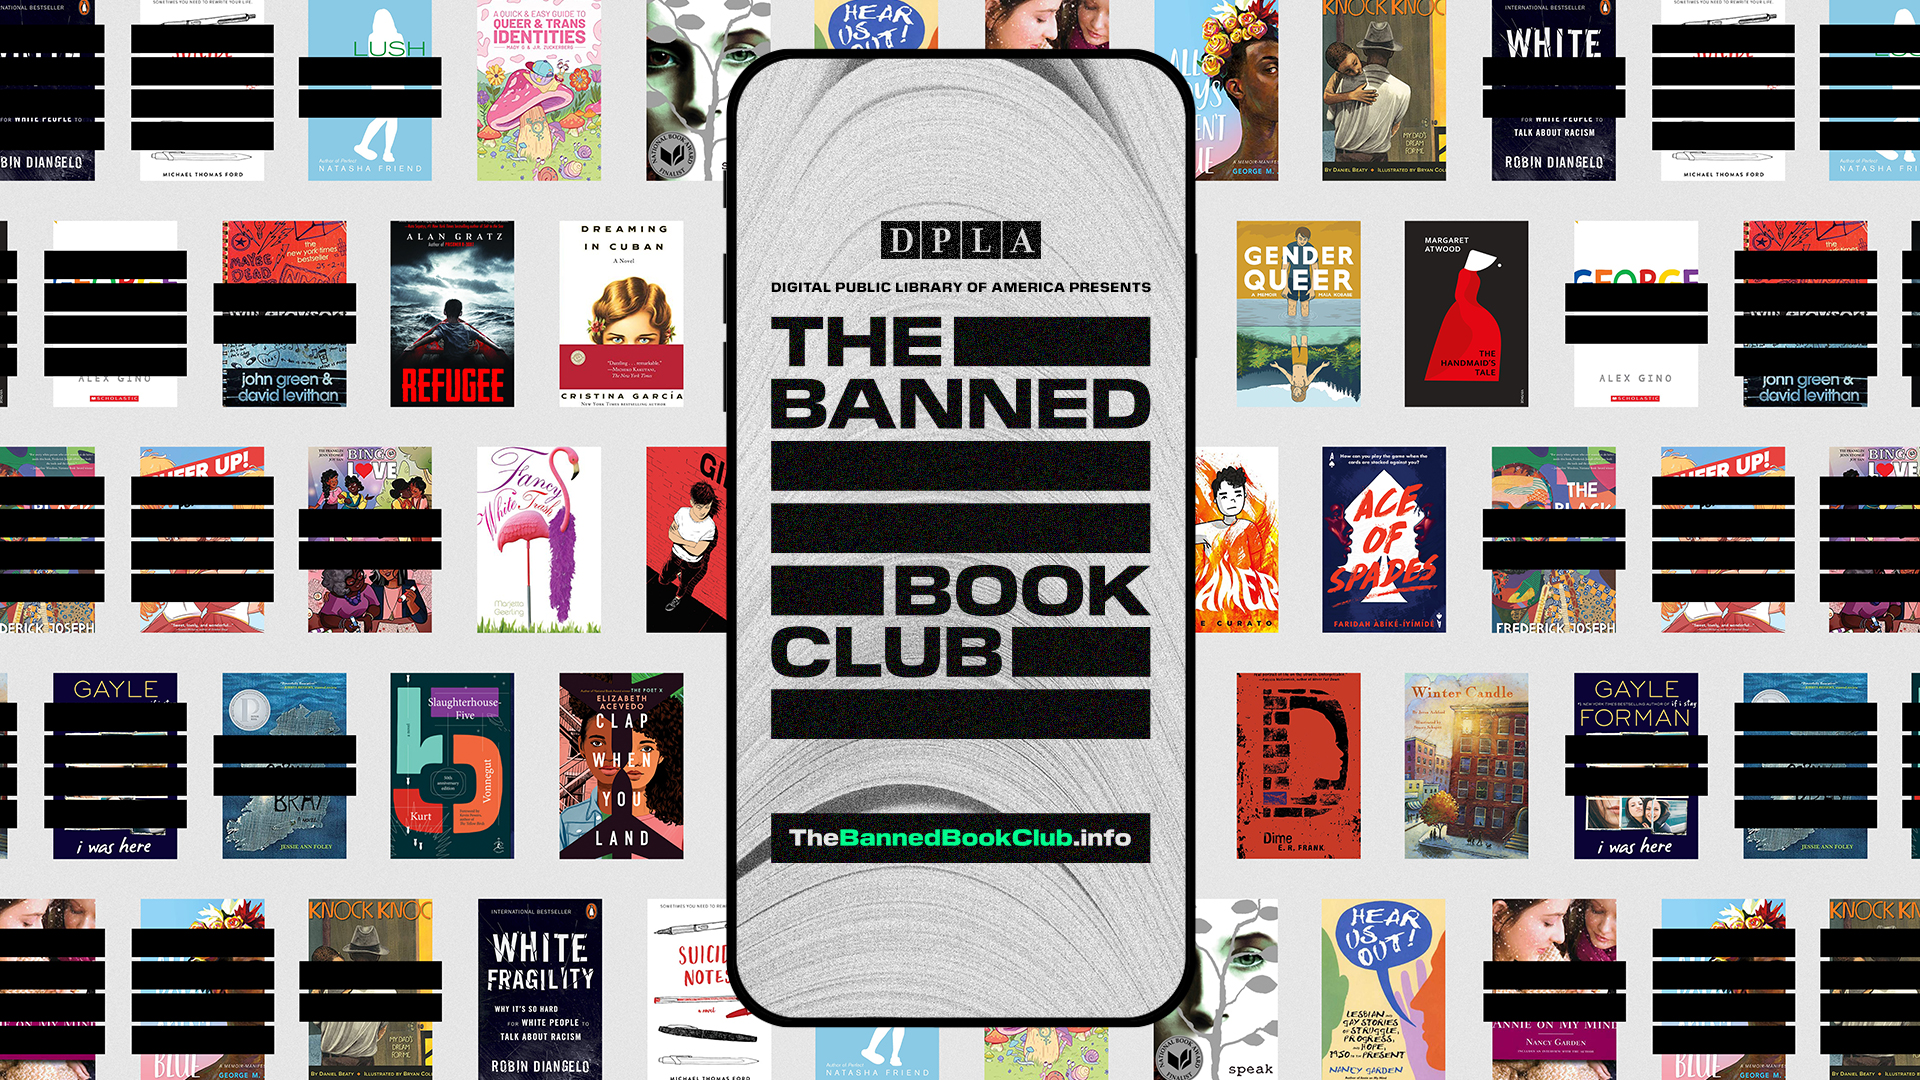 Image of the Banned Book Club Logo